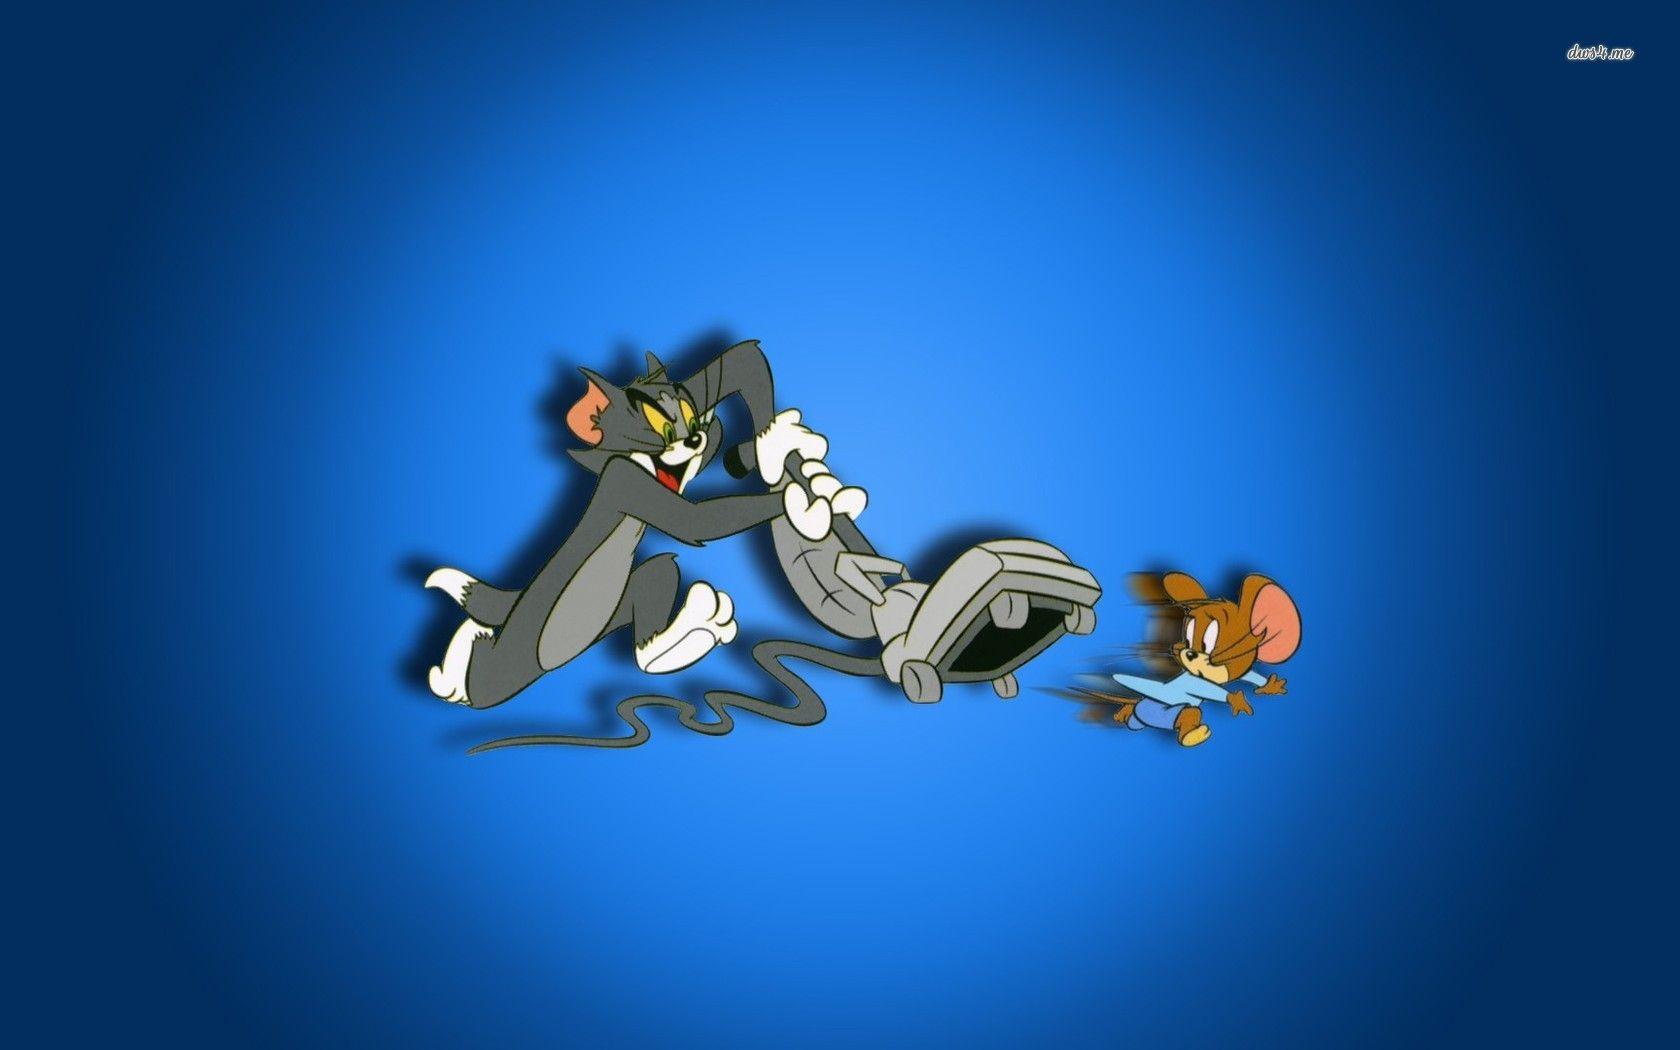 tom and jerry cartoon wallpaper picture, tom and jerry cartoon